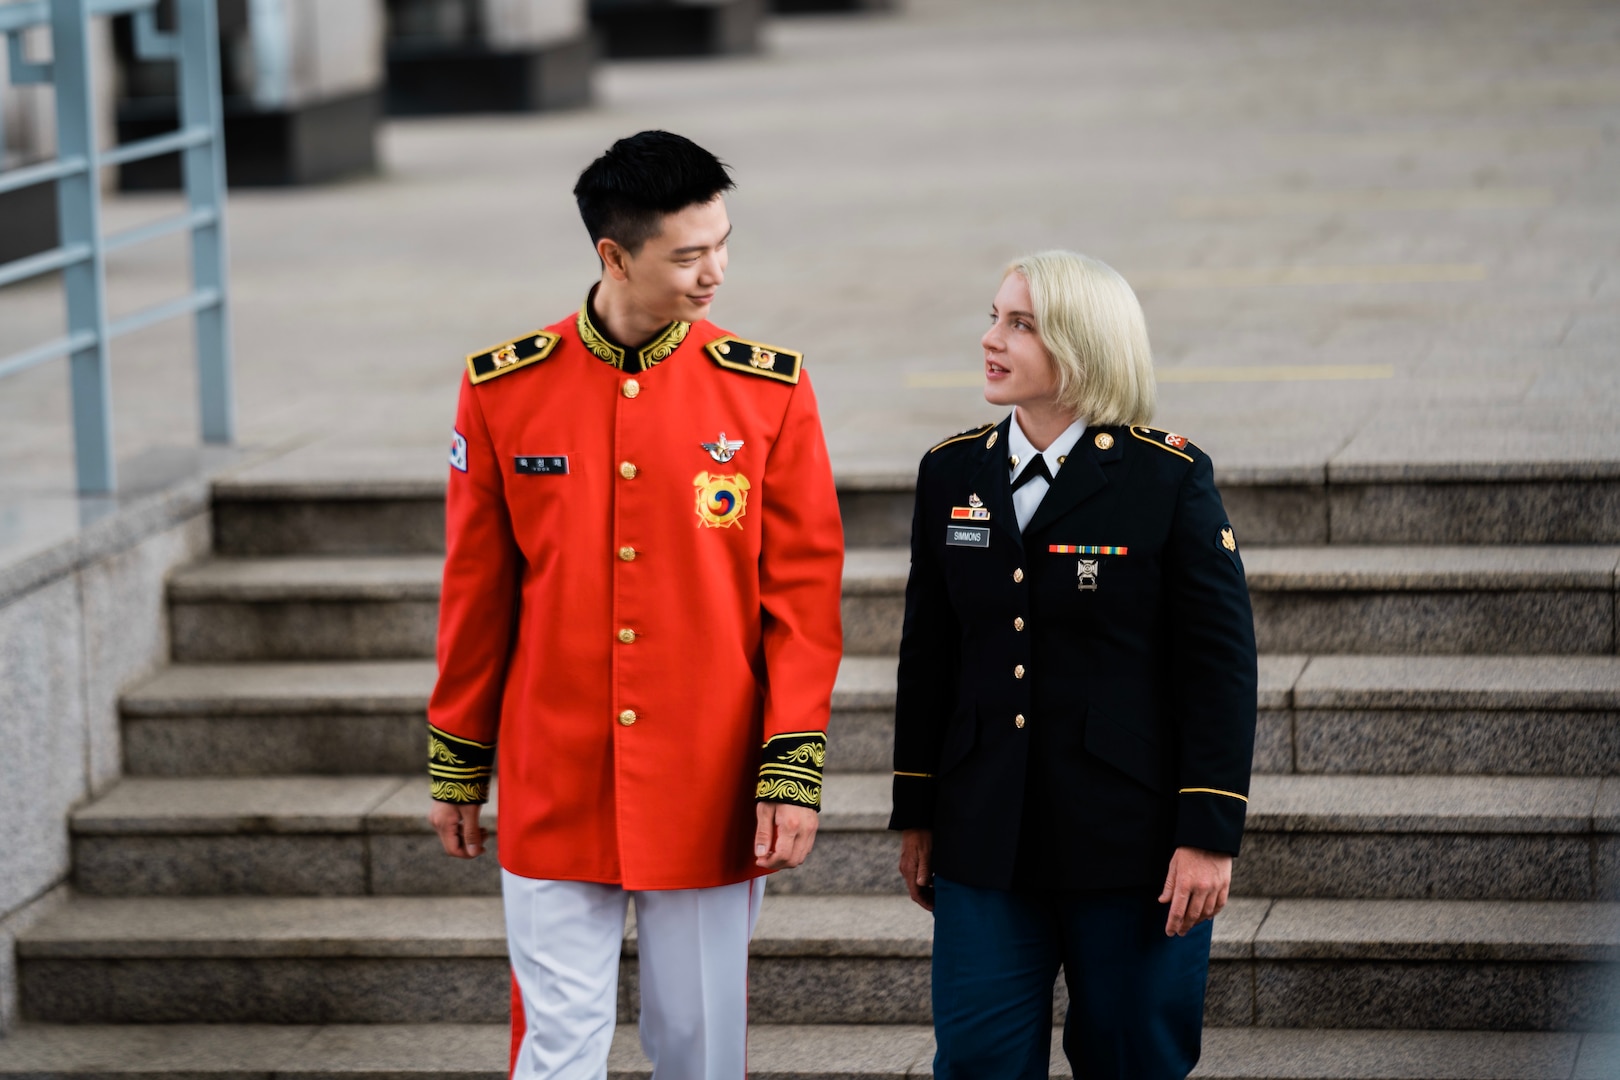 ROK Army Sgt. Yook Sung-jae in dress uniform is standing on the left while U.S. Army Spc. Brittany D. Simmons in dress uniform is standing on the right and both are looking at one another, talking. Behind them is a blurred stairway from inside of the War Memorial of Korea.